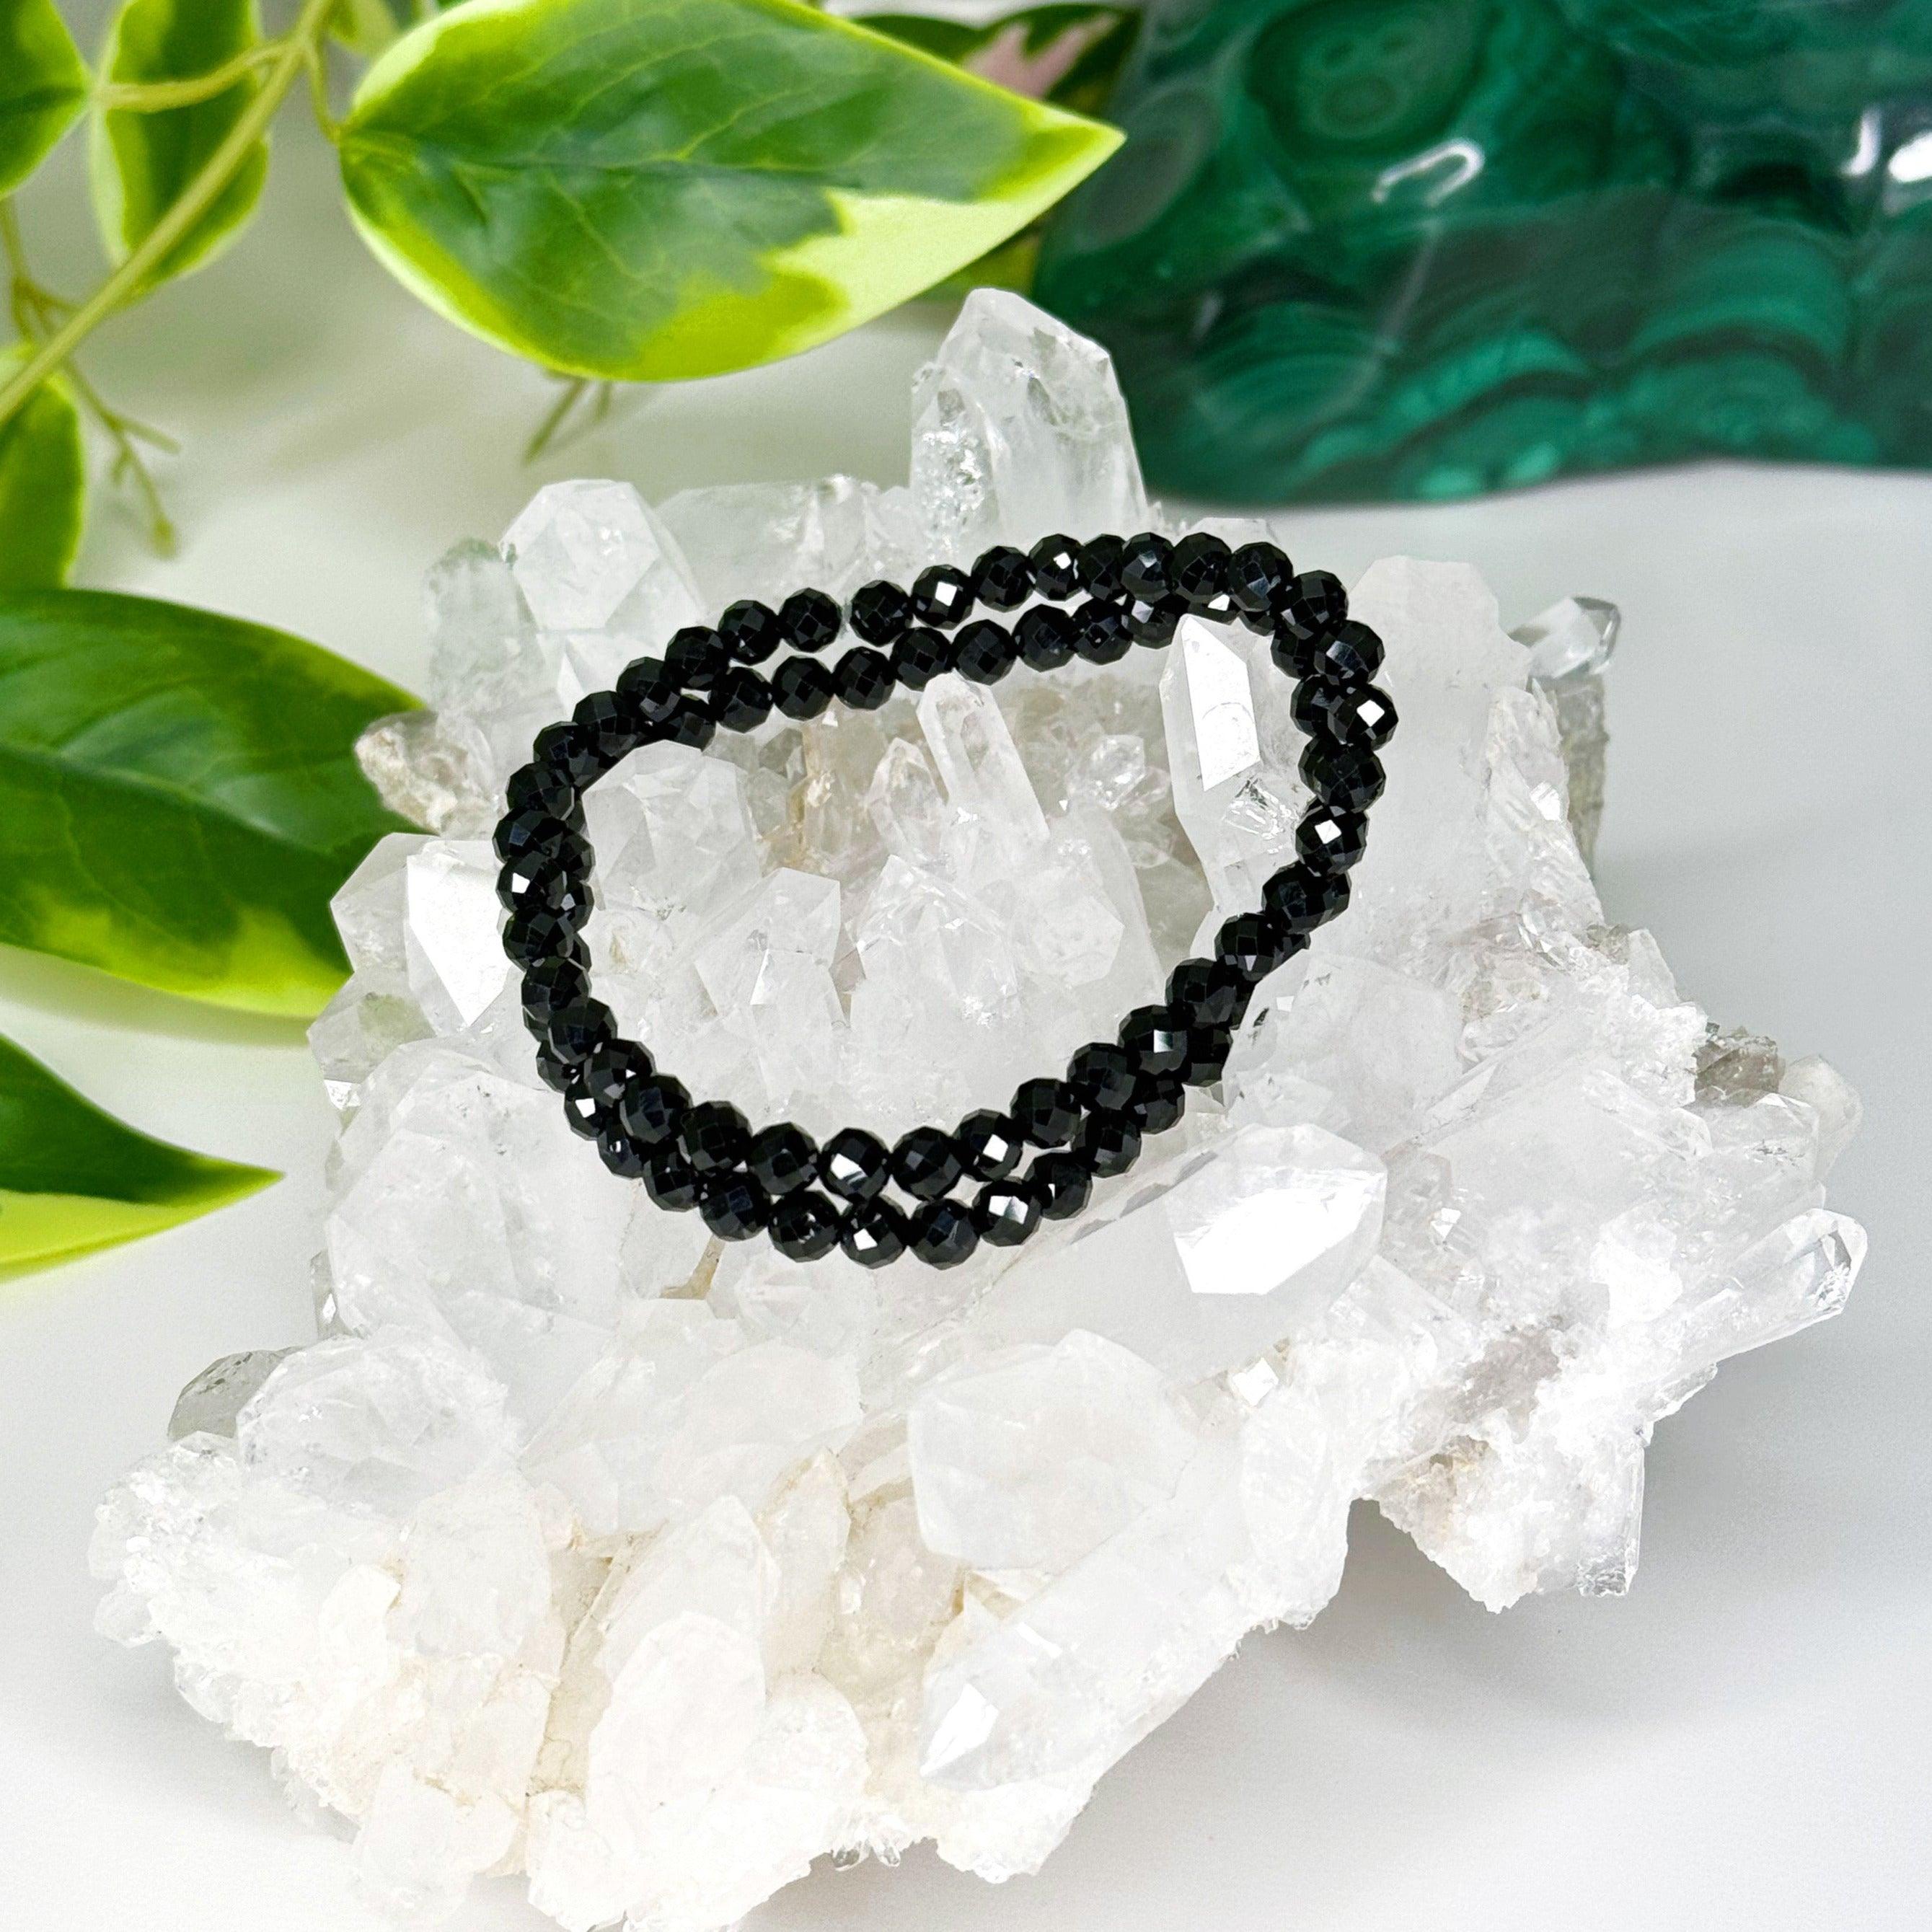 BLACK SPINEL (FACETED) 5mm - HANDMADE CRYSTAL BRACELET - 5mm, aries, black, black spinel, bracelet, crystal bracelet, earth, faceted, handmade bracelet, jewelry, market bracelet, protection gift bundle, recently added, sagittarius, Scorpio Season, spinel, Wearable - The Mineral Maven